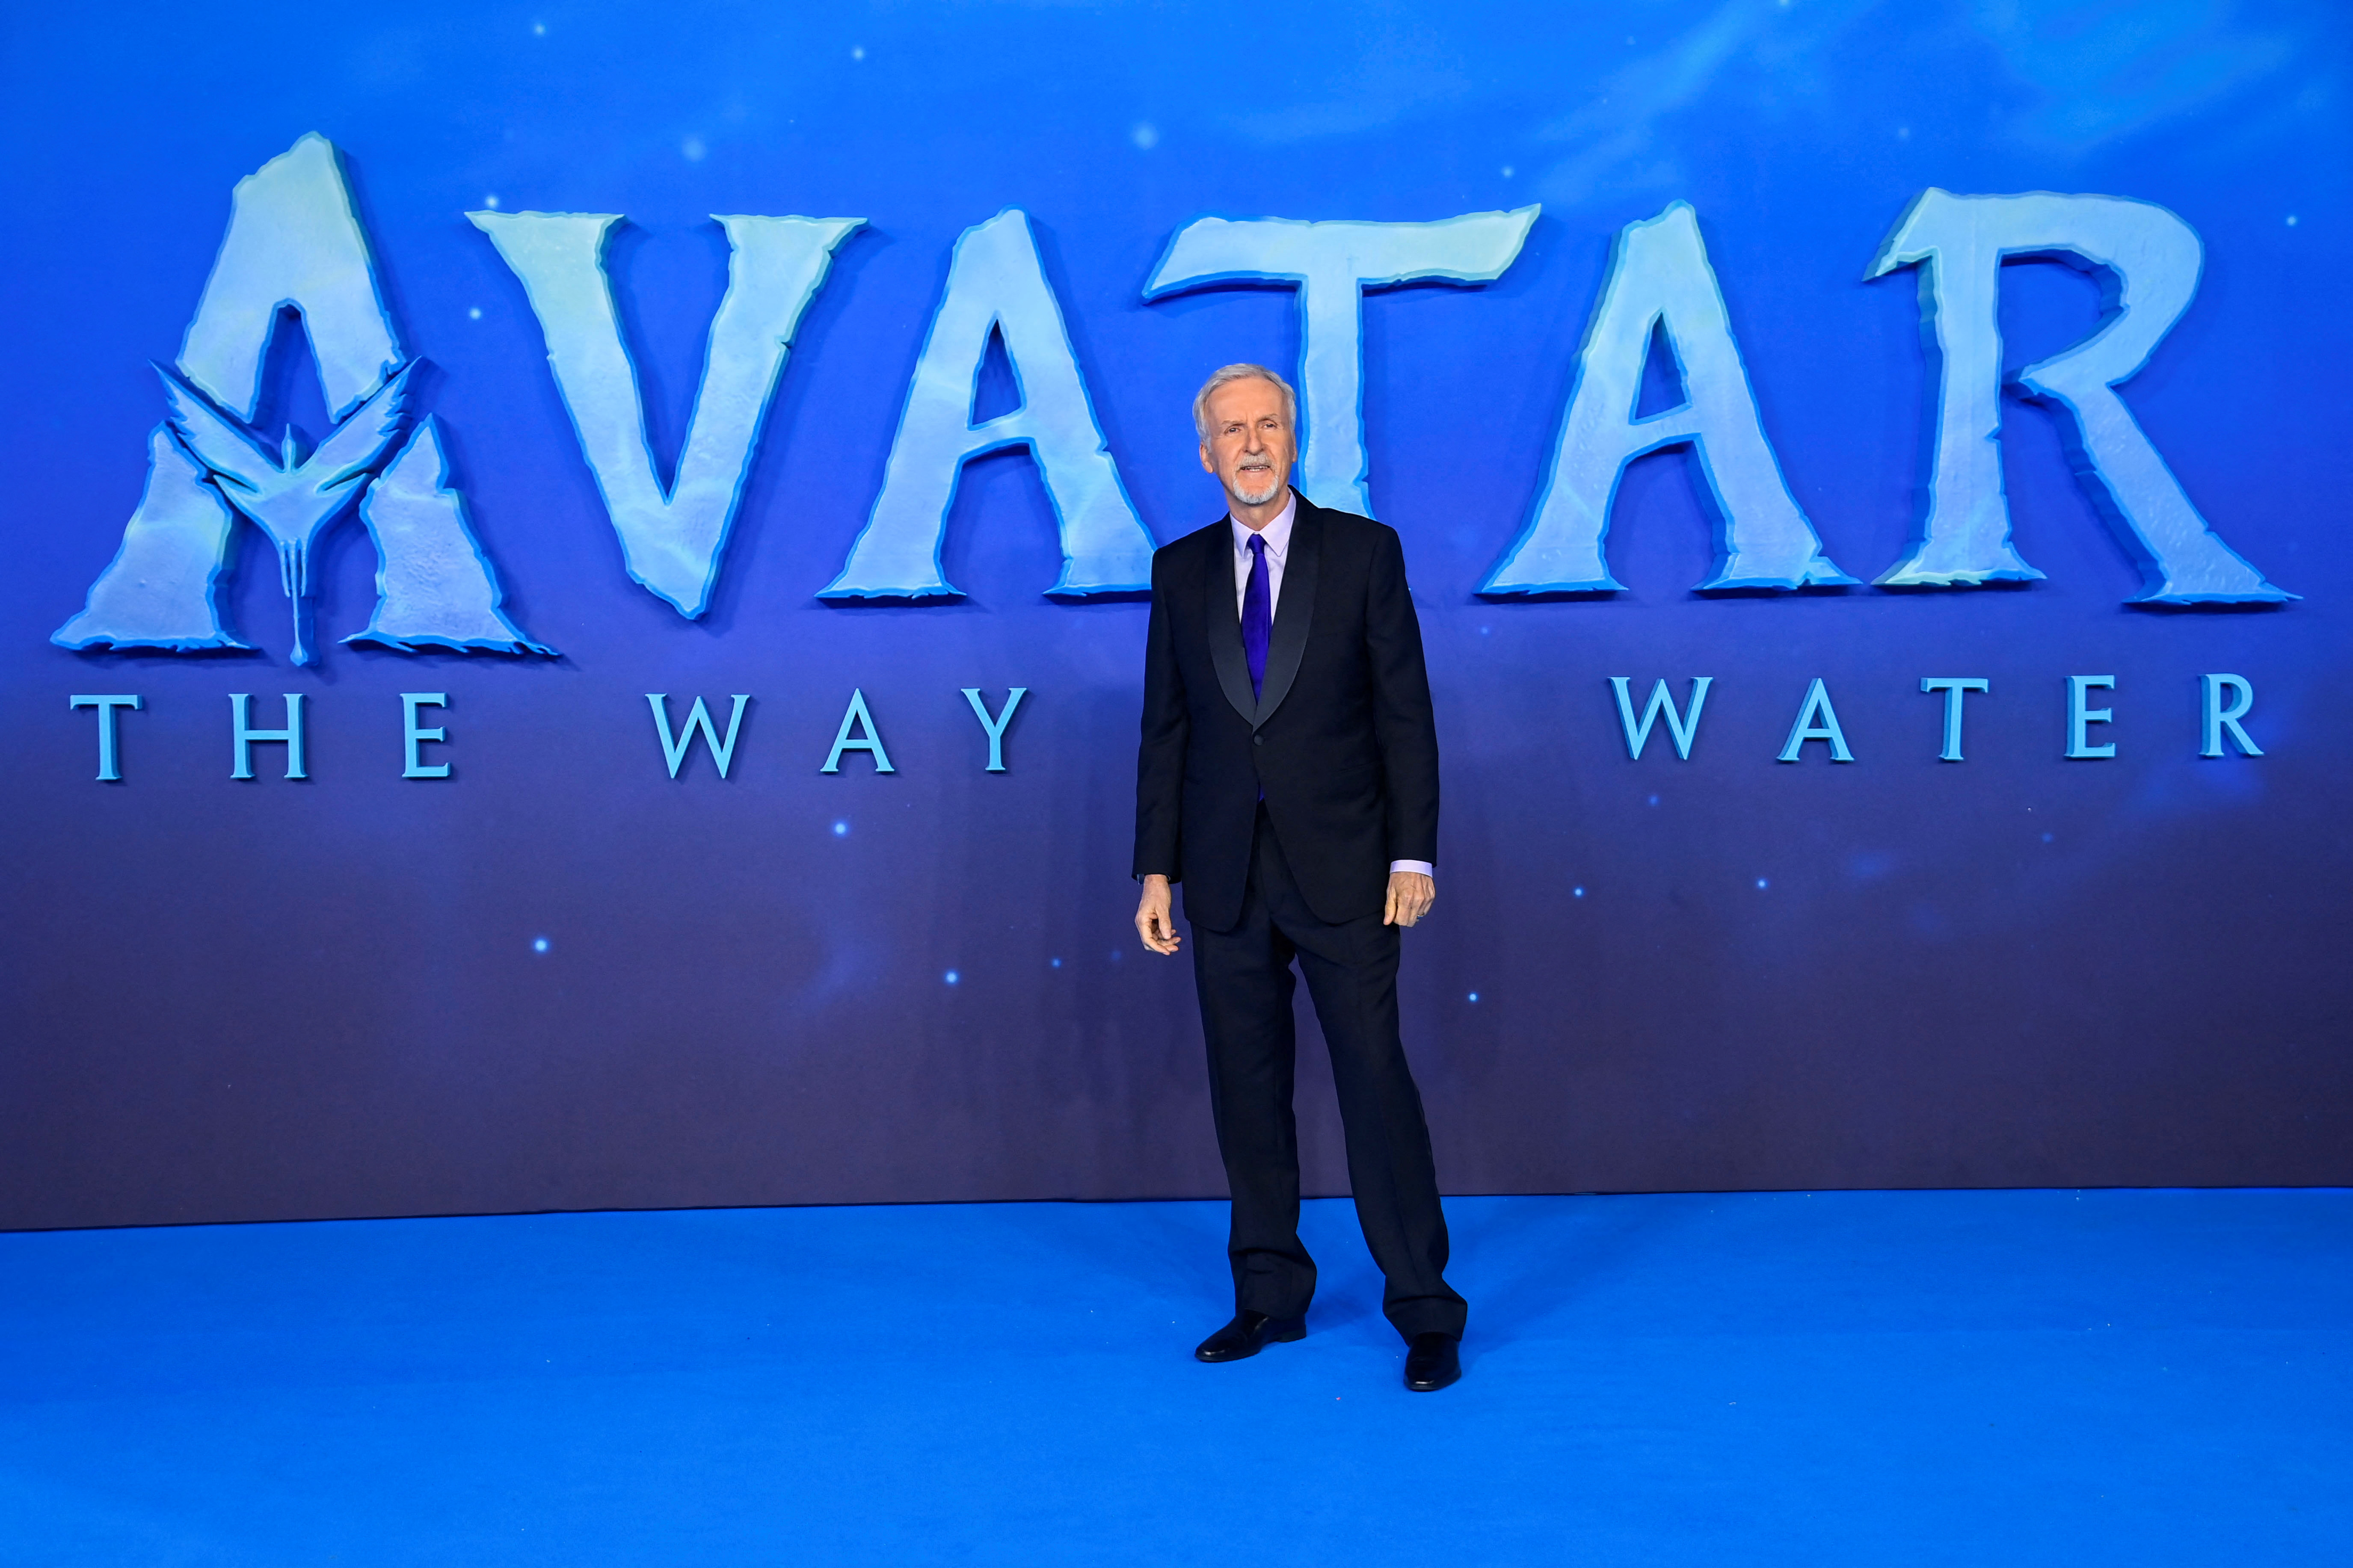 World premiere of 'Avatar: The Way of Water' in London